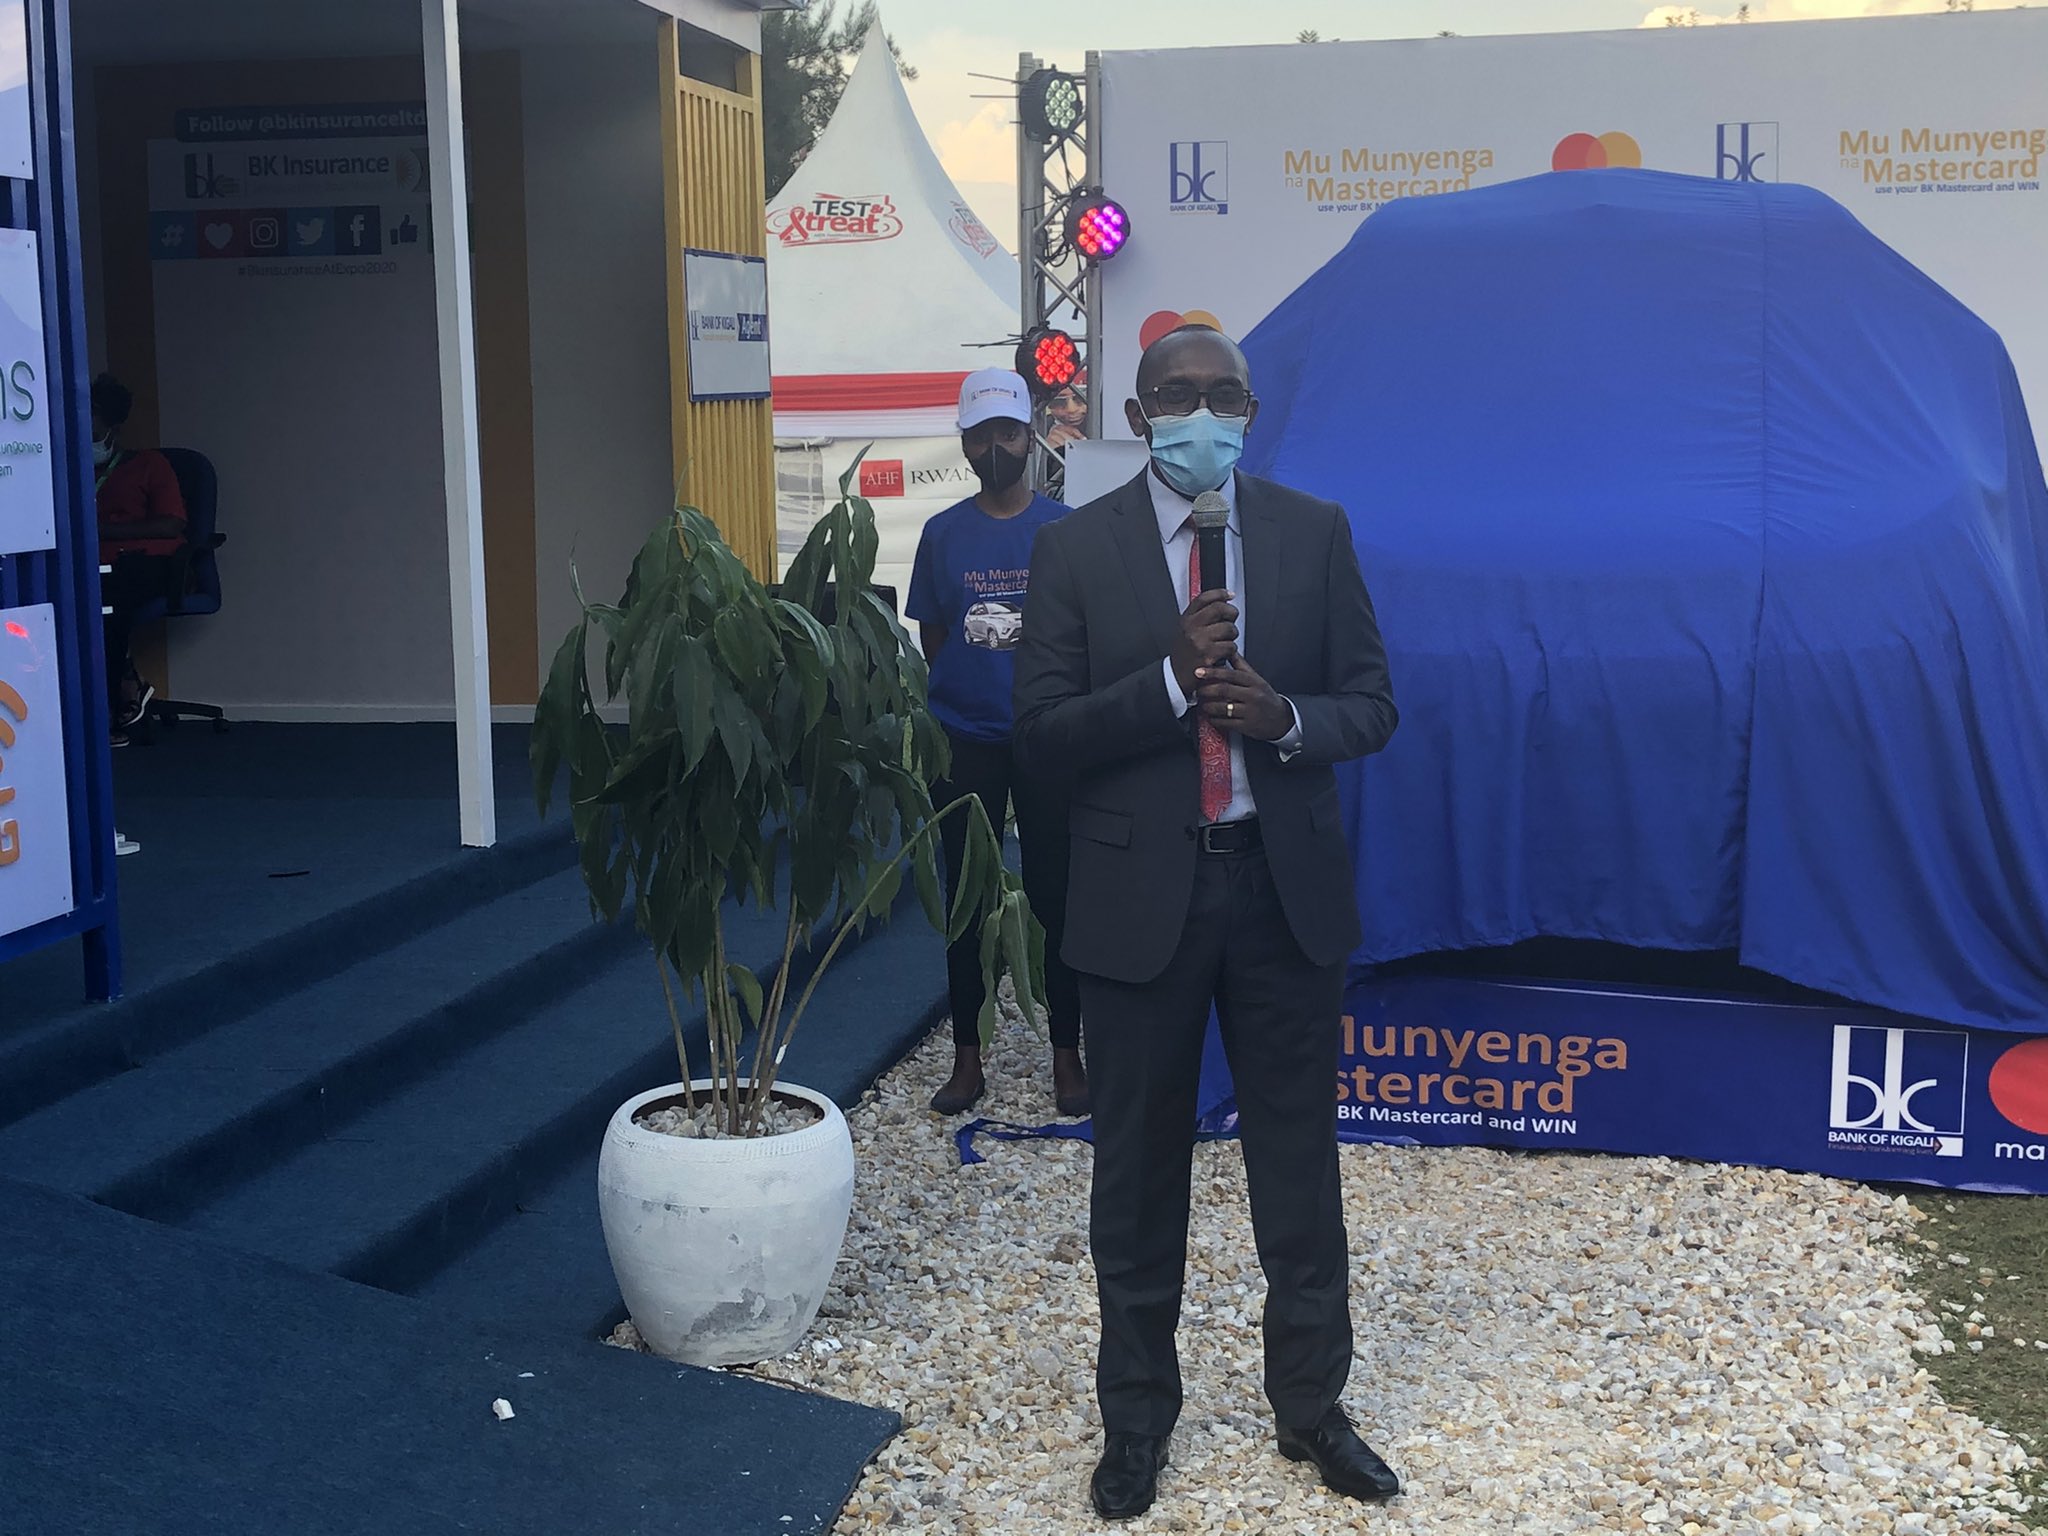 Benjamin Mutimura, Chief Commercial Officer of BK, speaking at the launch ceremony of  new campaign dubbed u2018Mu Munyenga na Mastercardu2019 that seeks to encourage cashless payment. / Courtesy